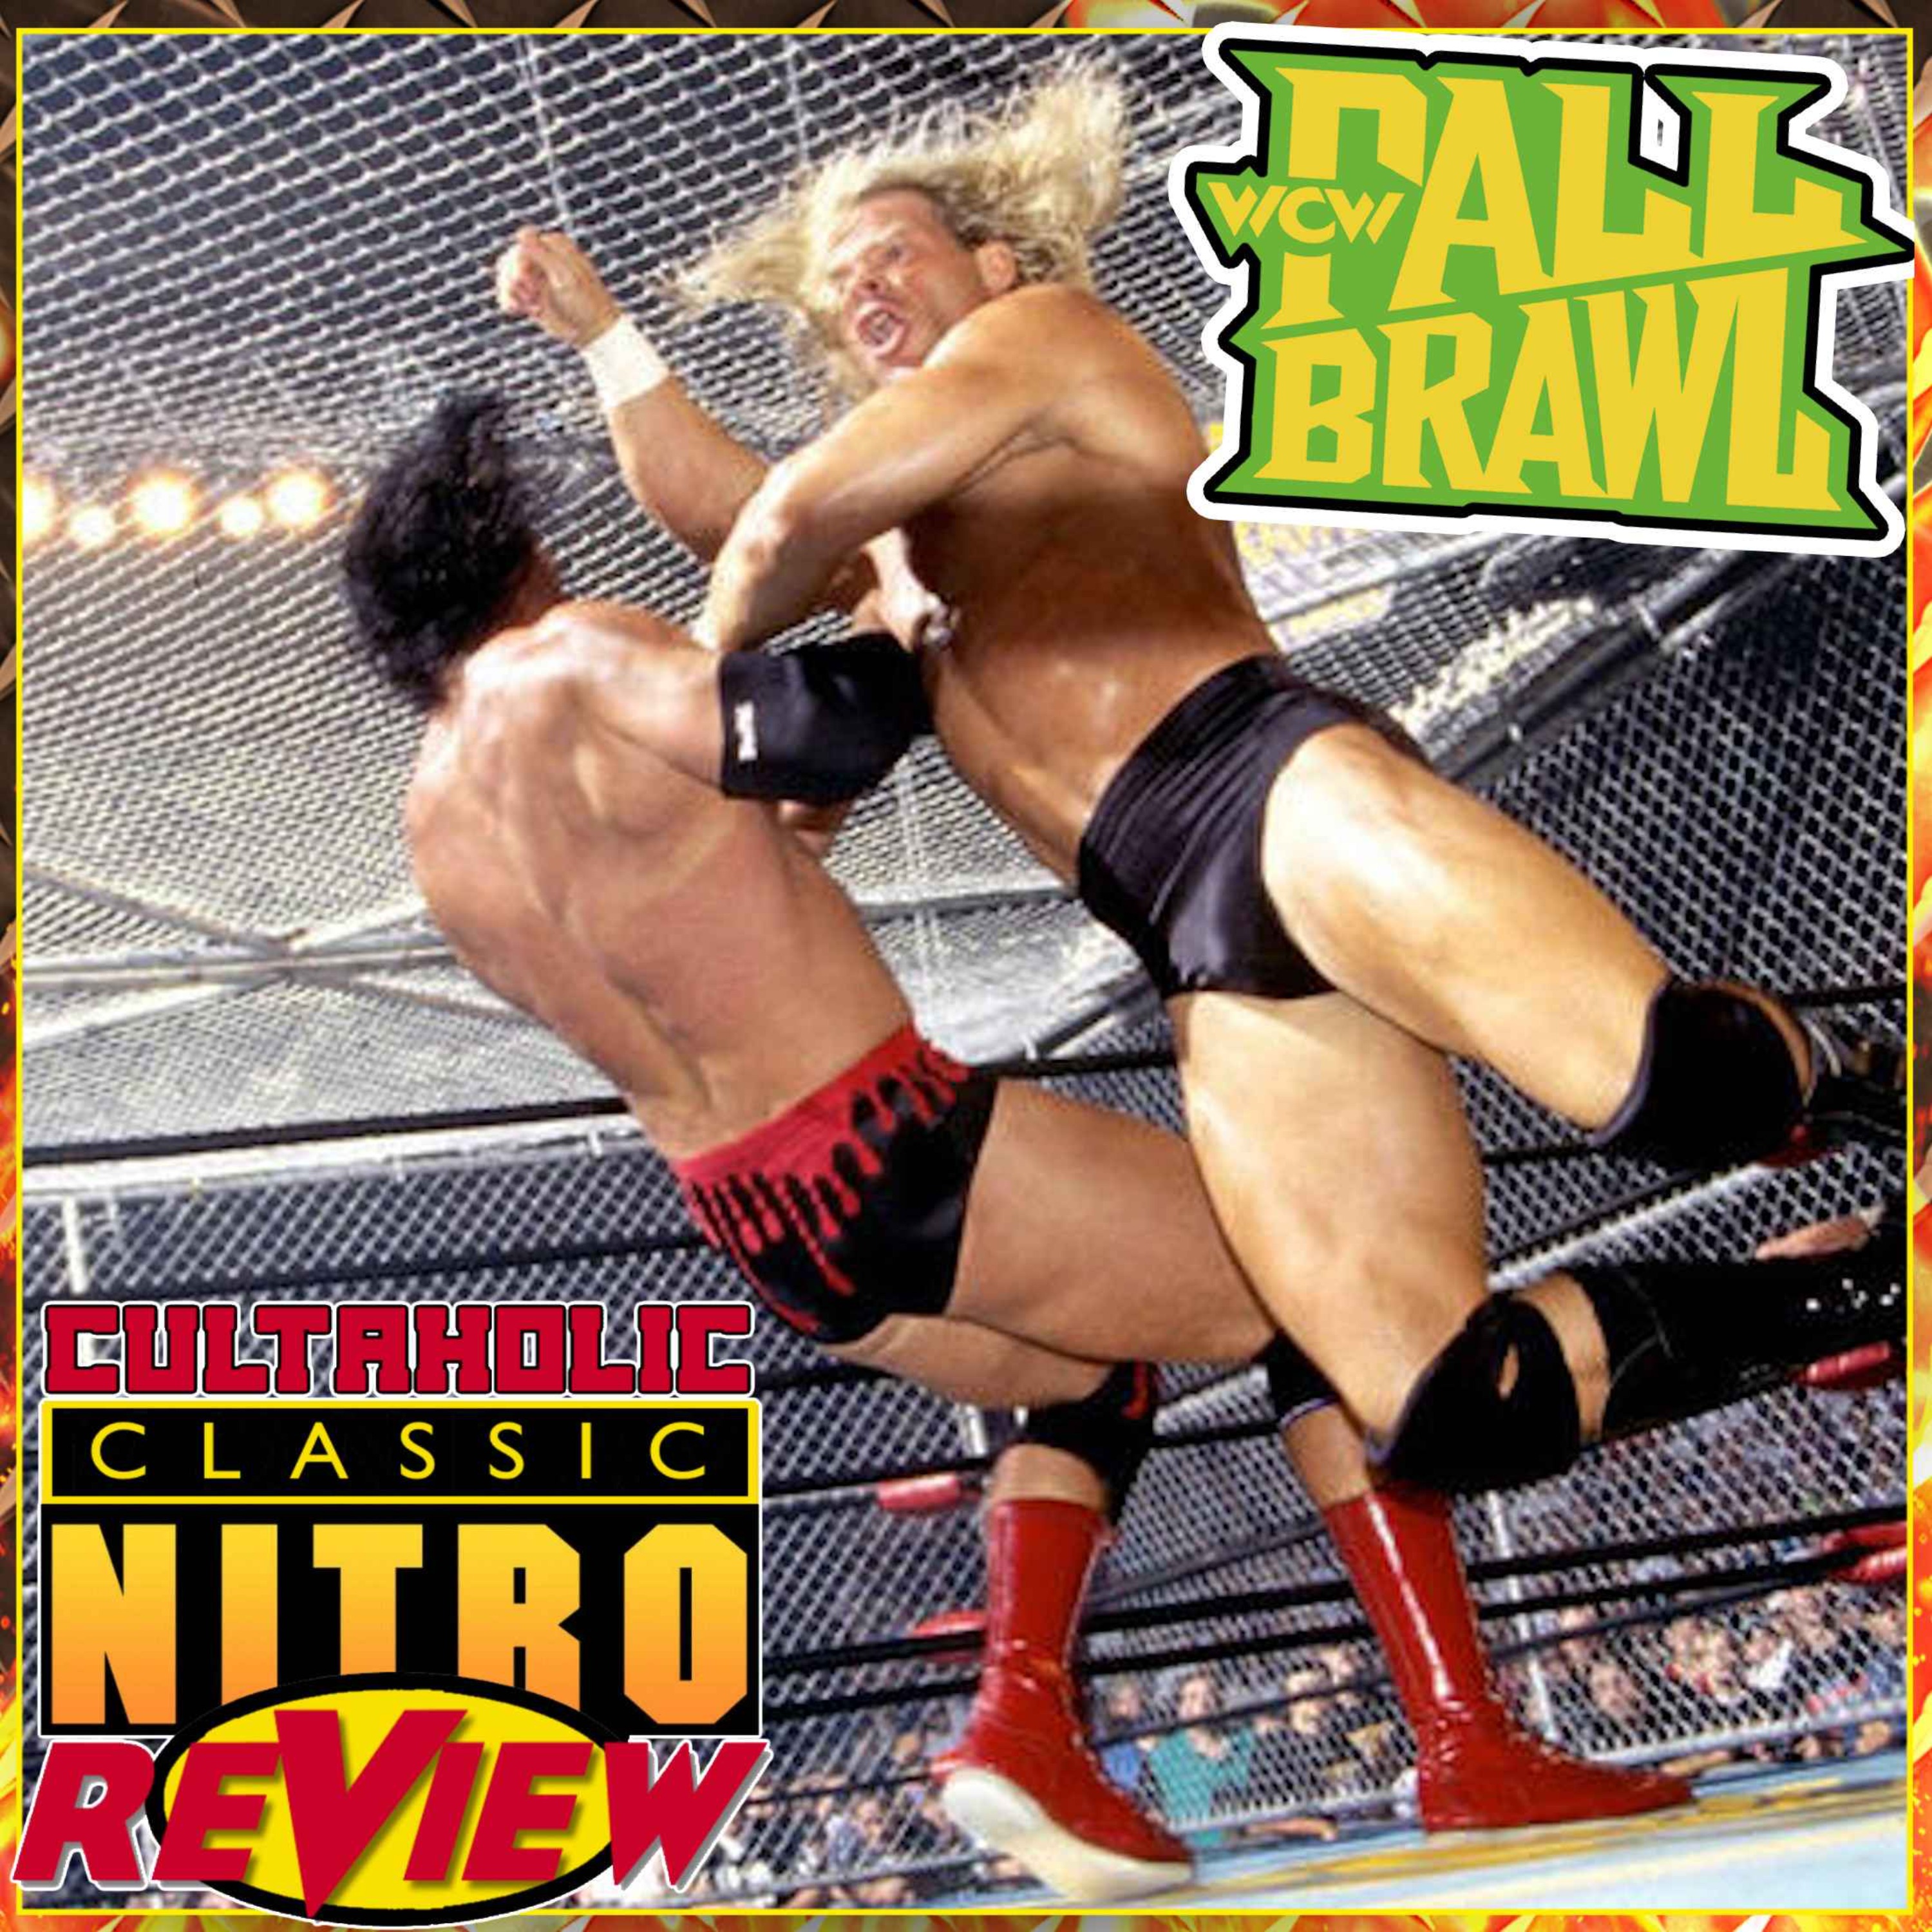 RETRO REACTIONS: WCW Fall Brawl 1996 - Did STING Turn His Back On WCW and Join the New World Order?